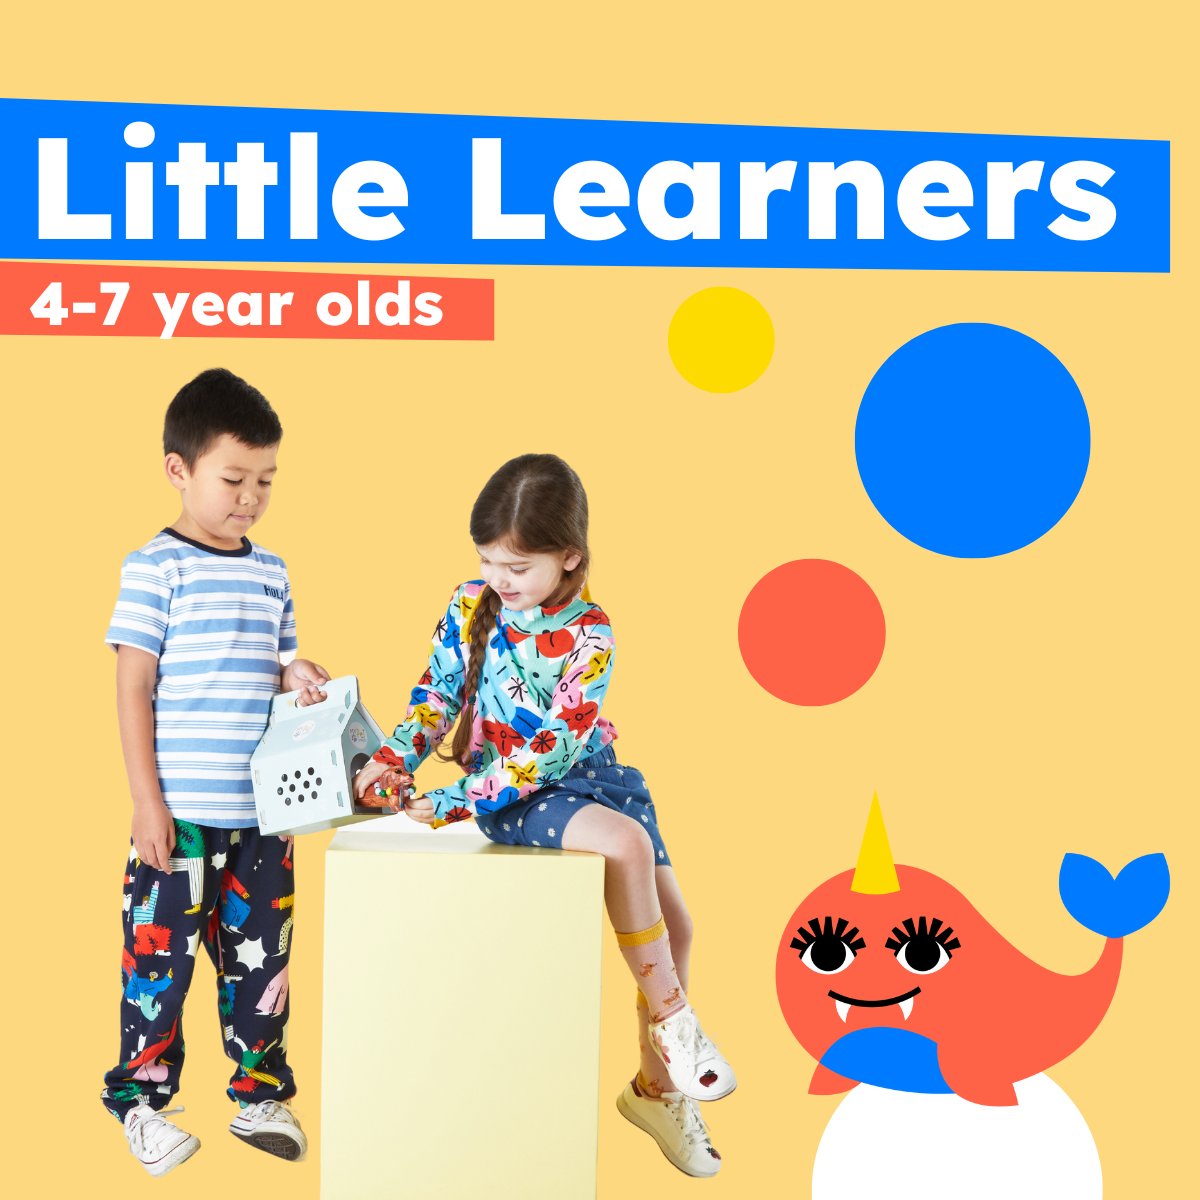 Little Learners 4 to 7 years